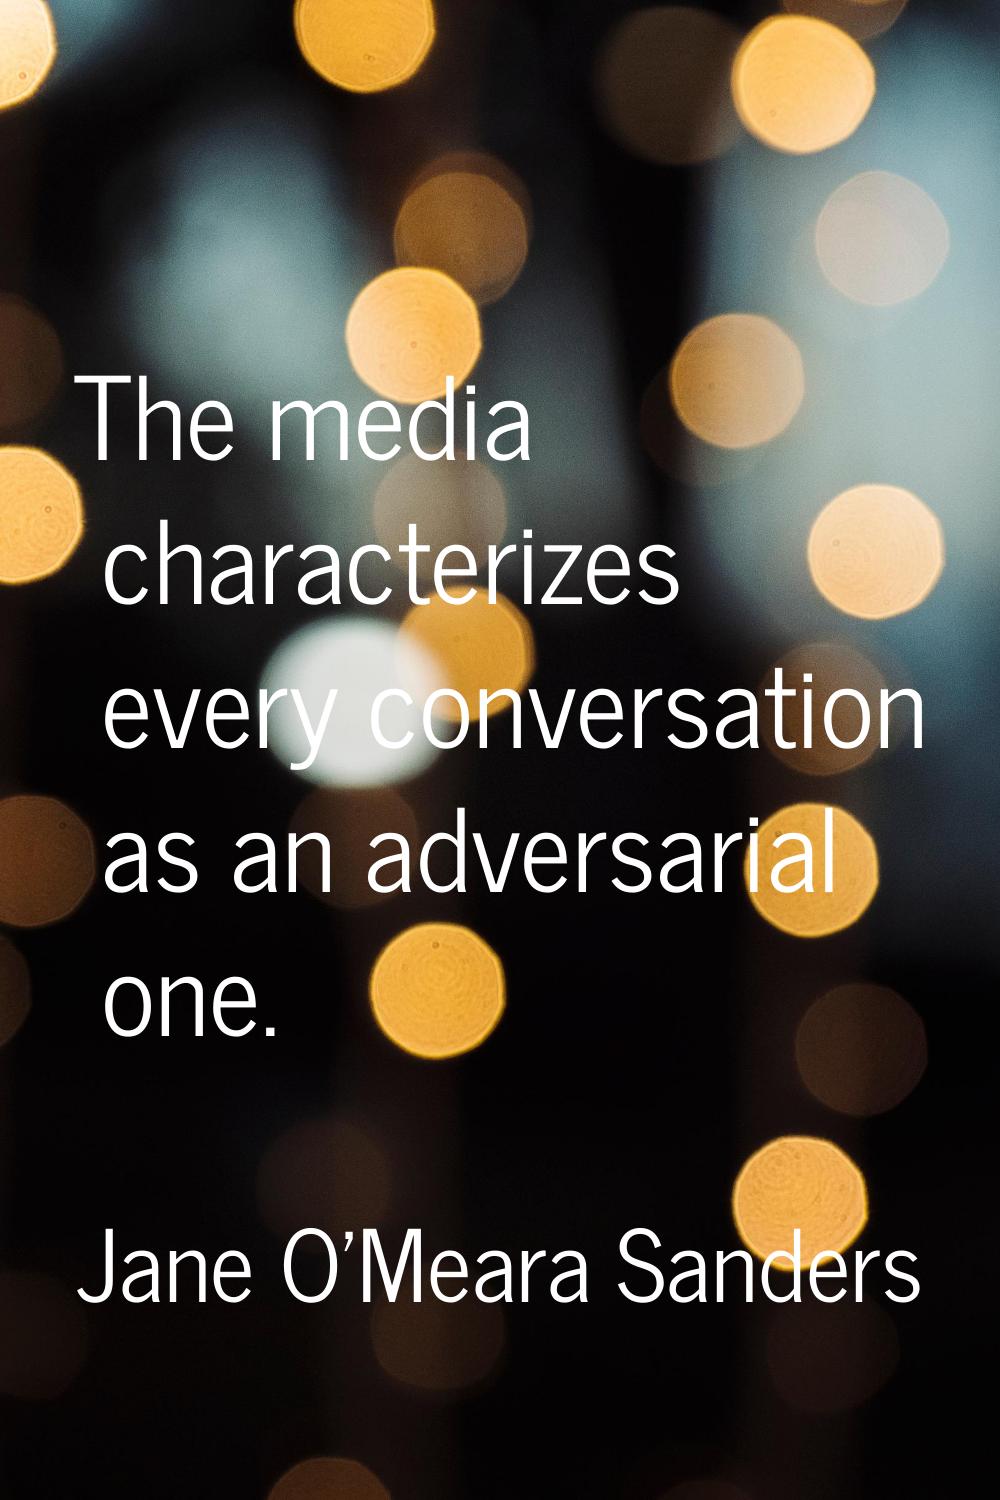 The media characterizes every conversation as an adversarial one.